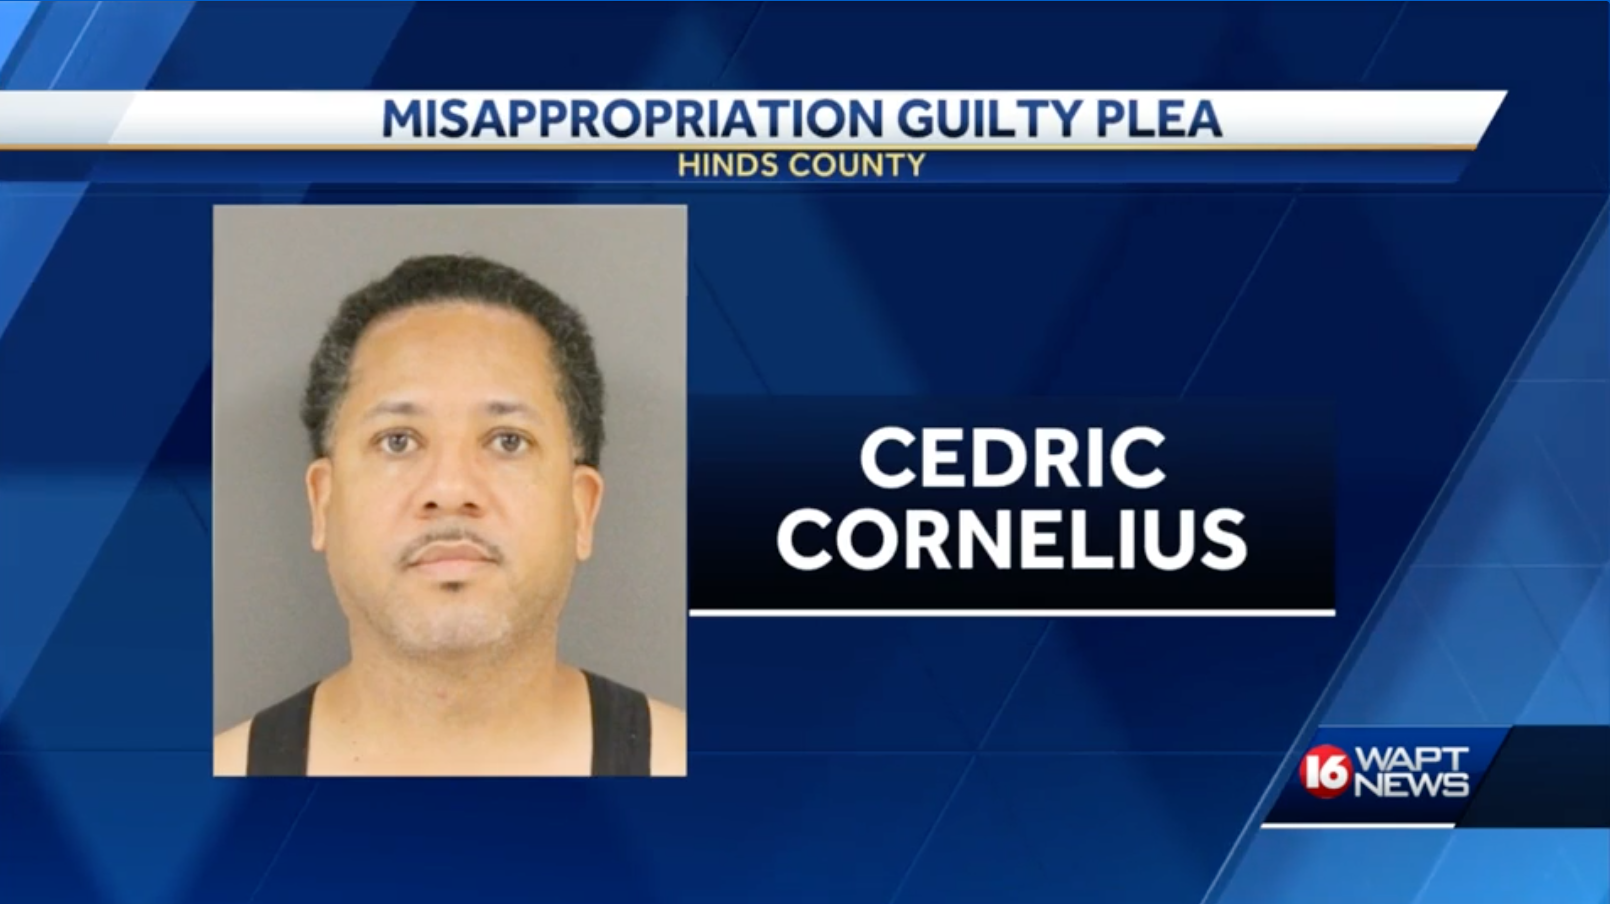 Man charged in Hinds County embezzlement scheme pleads guilty